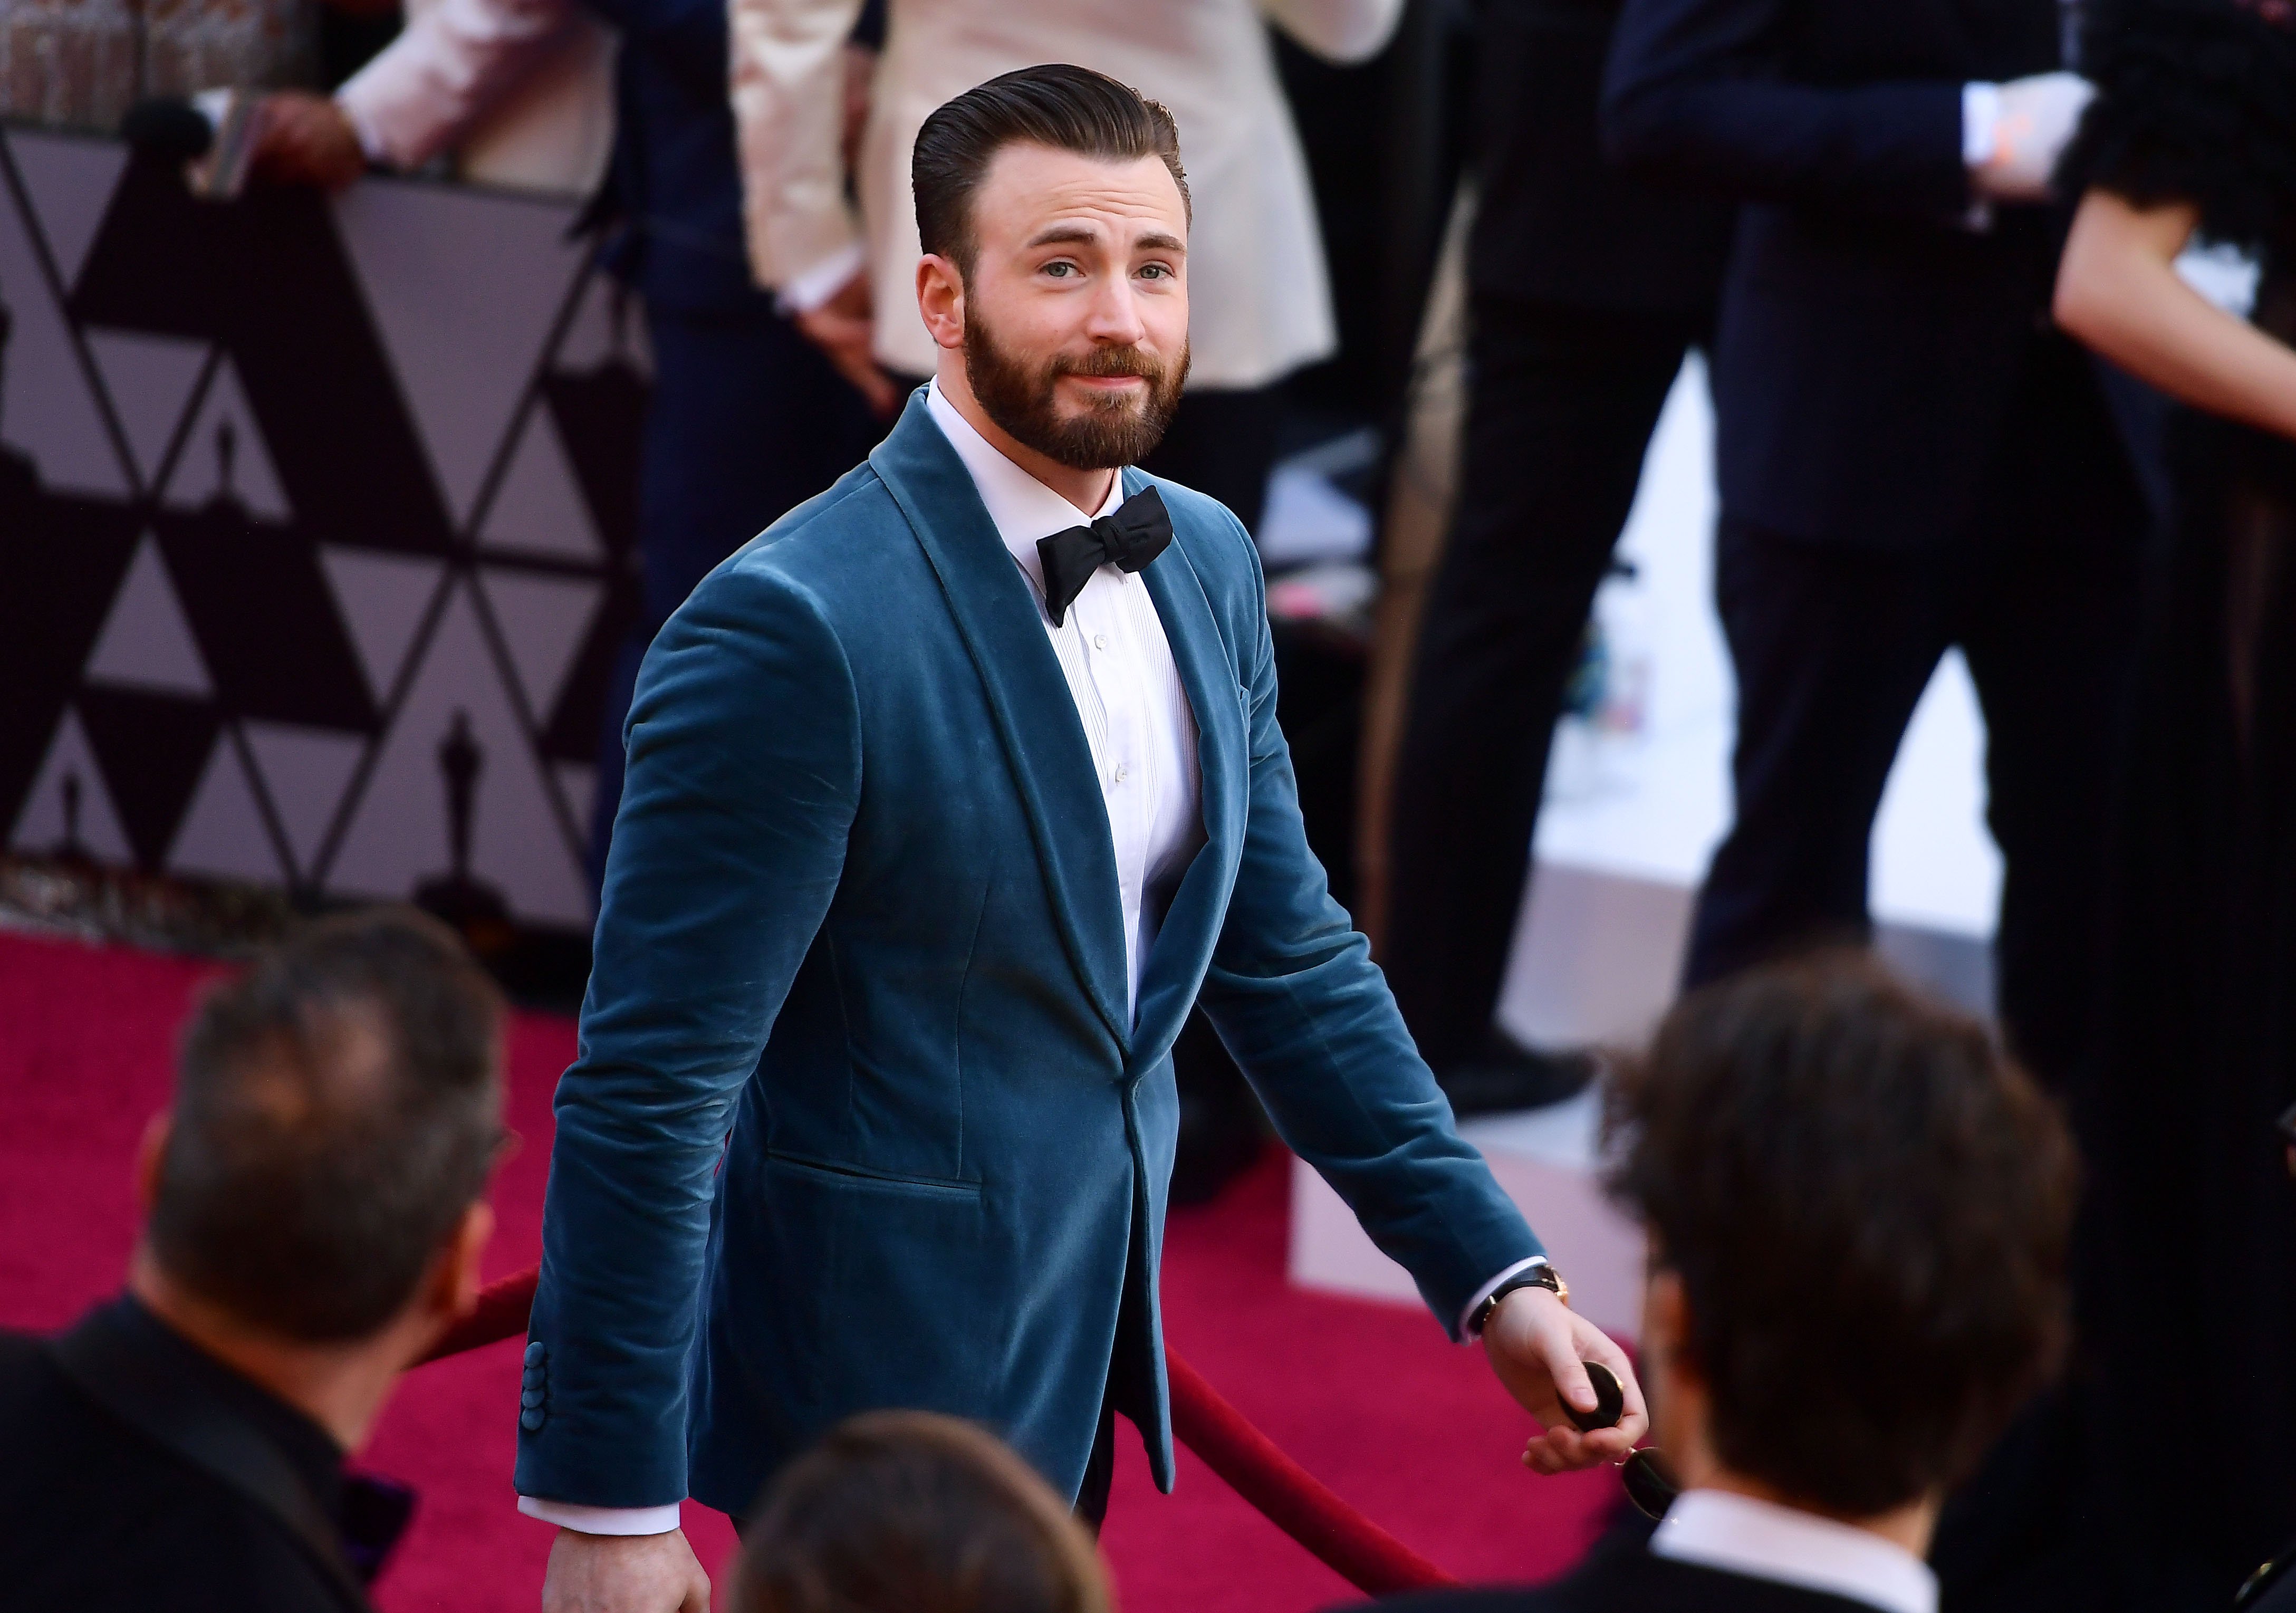 Chris Evans on the red carpet. | Photo: Getty Images